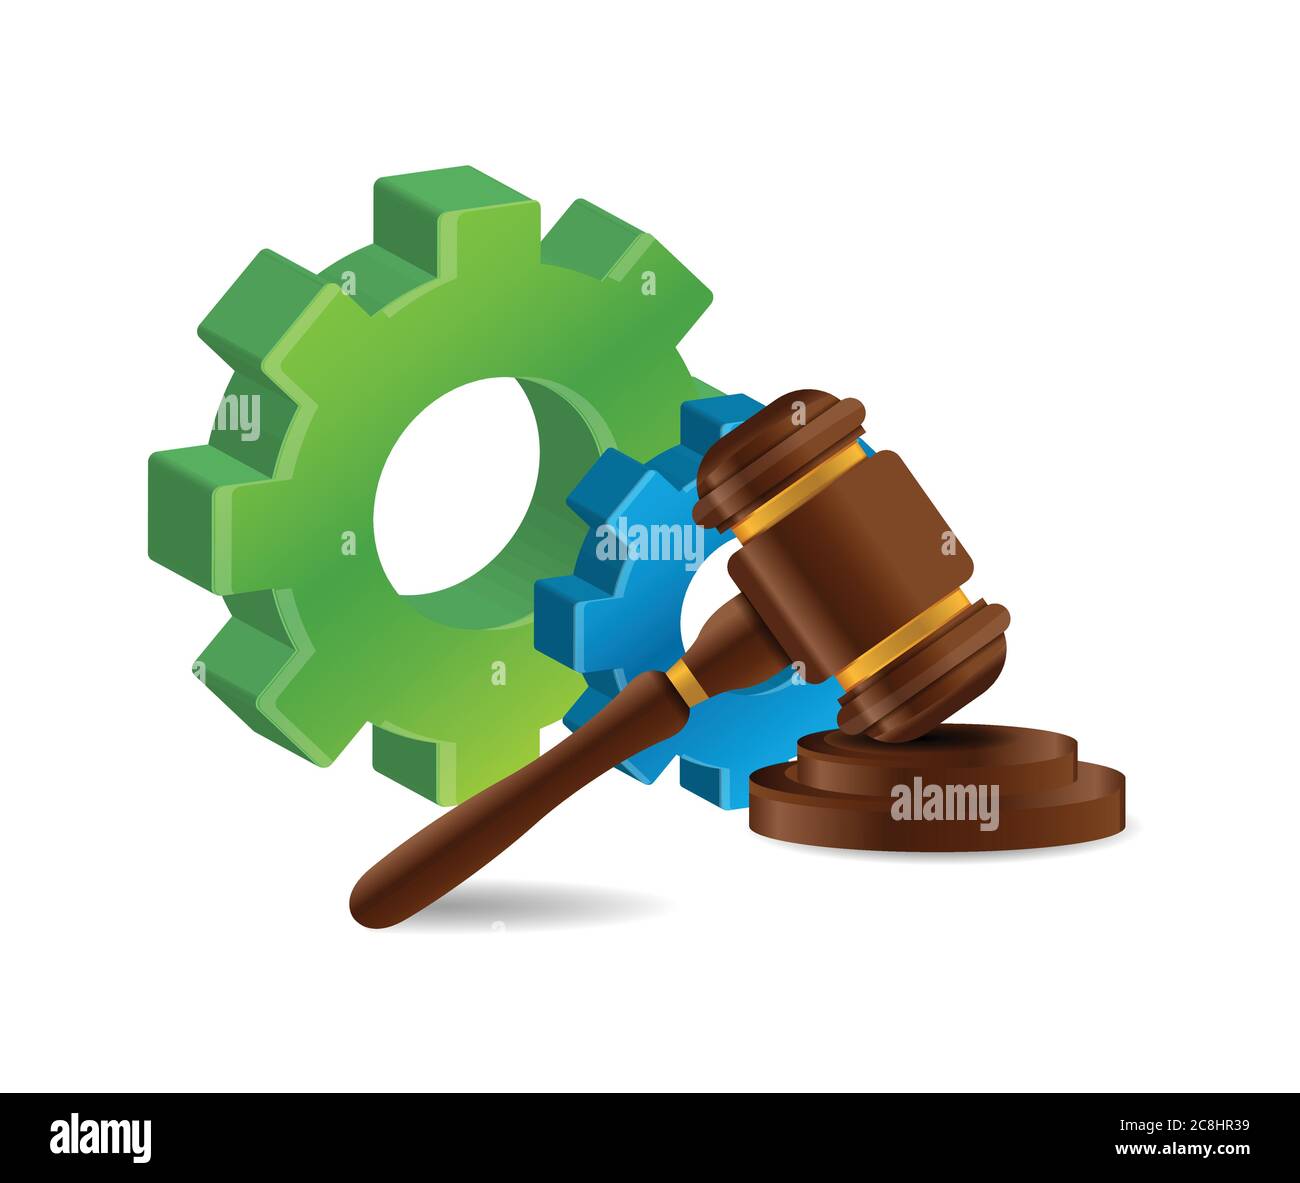 Industrial law concept illustration design over a white background Stock Vector